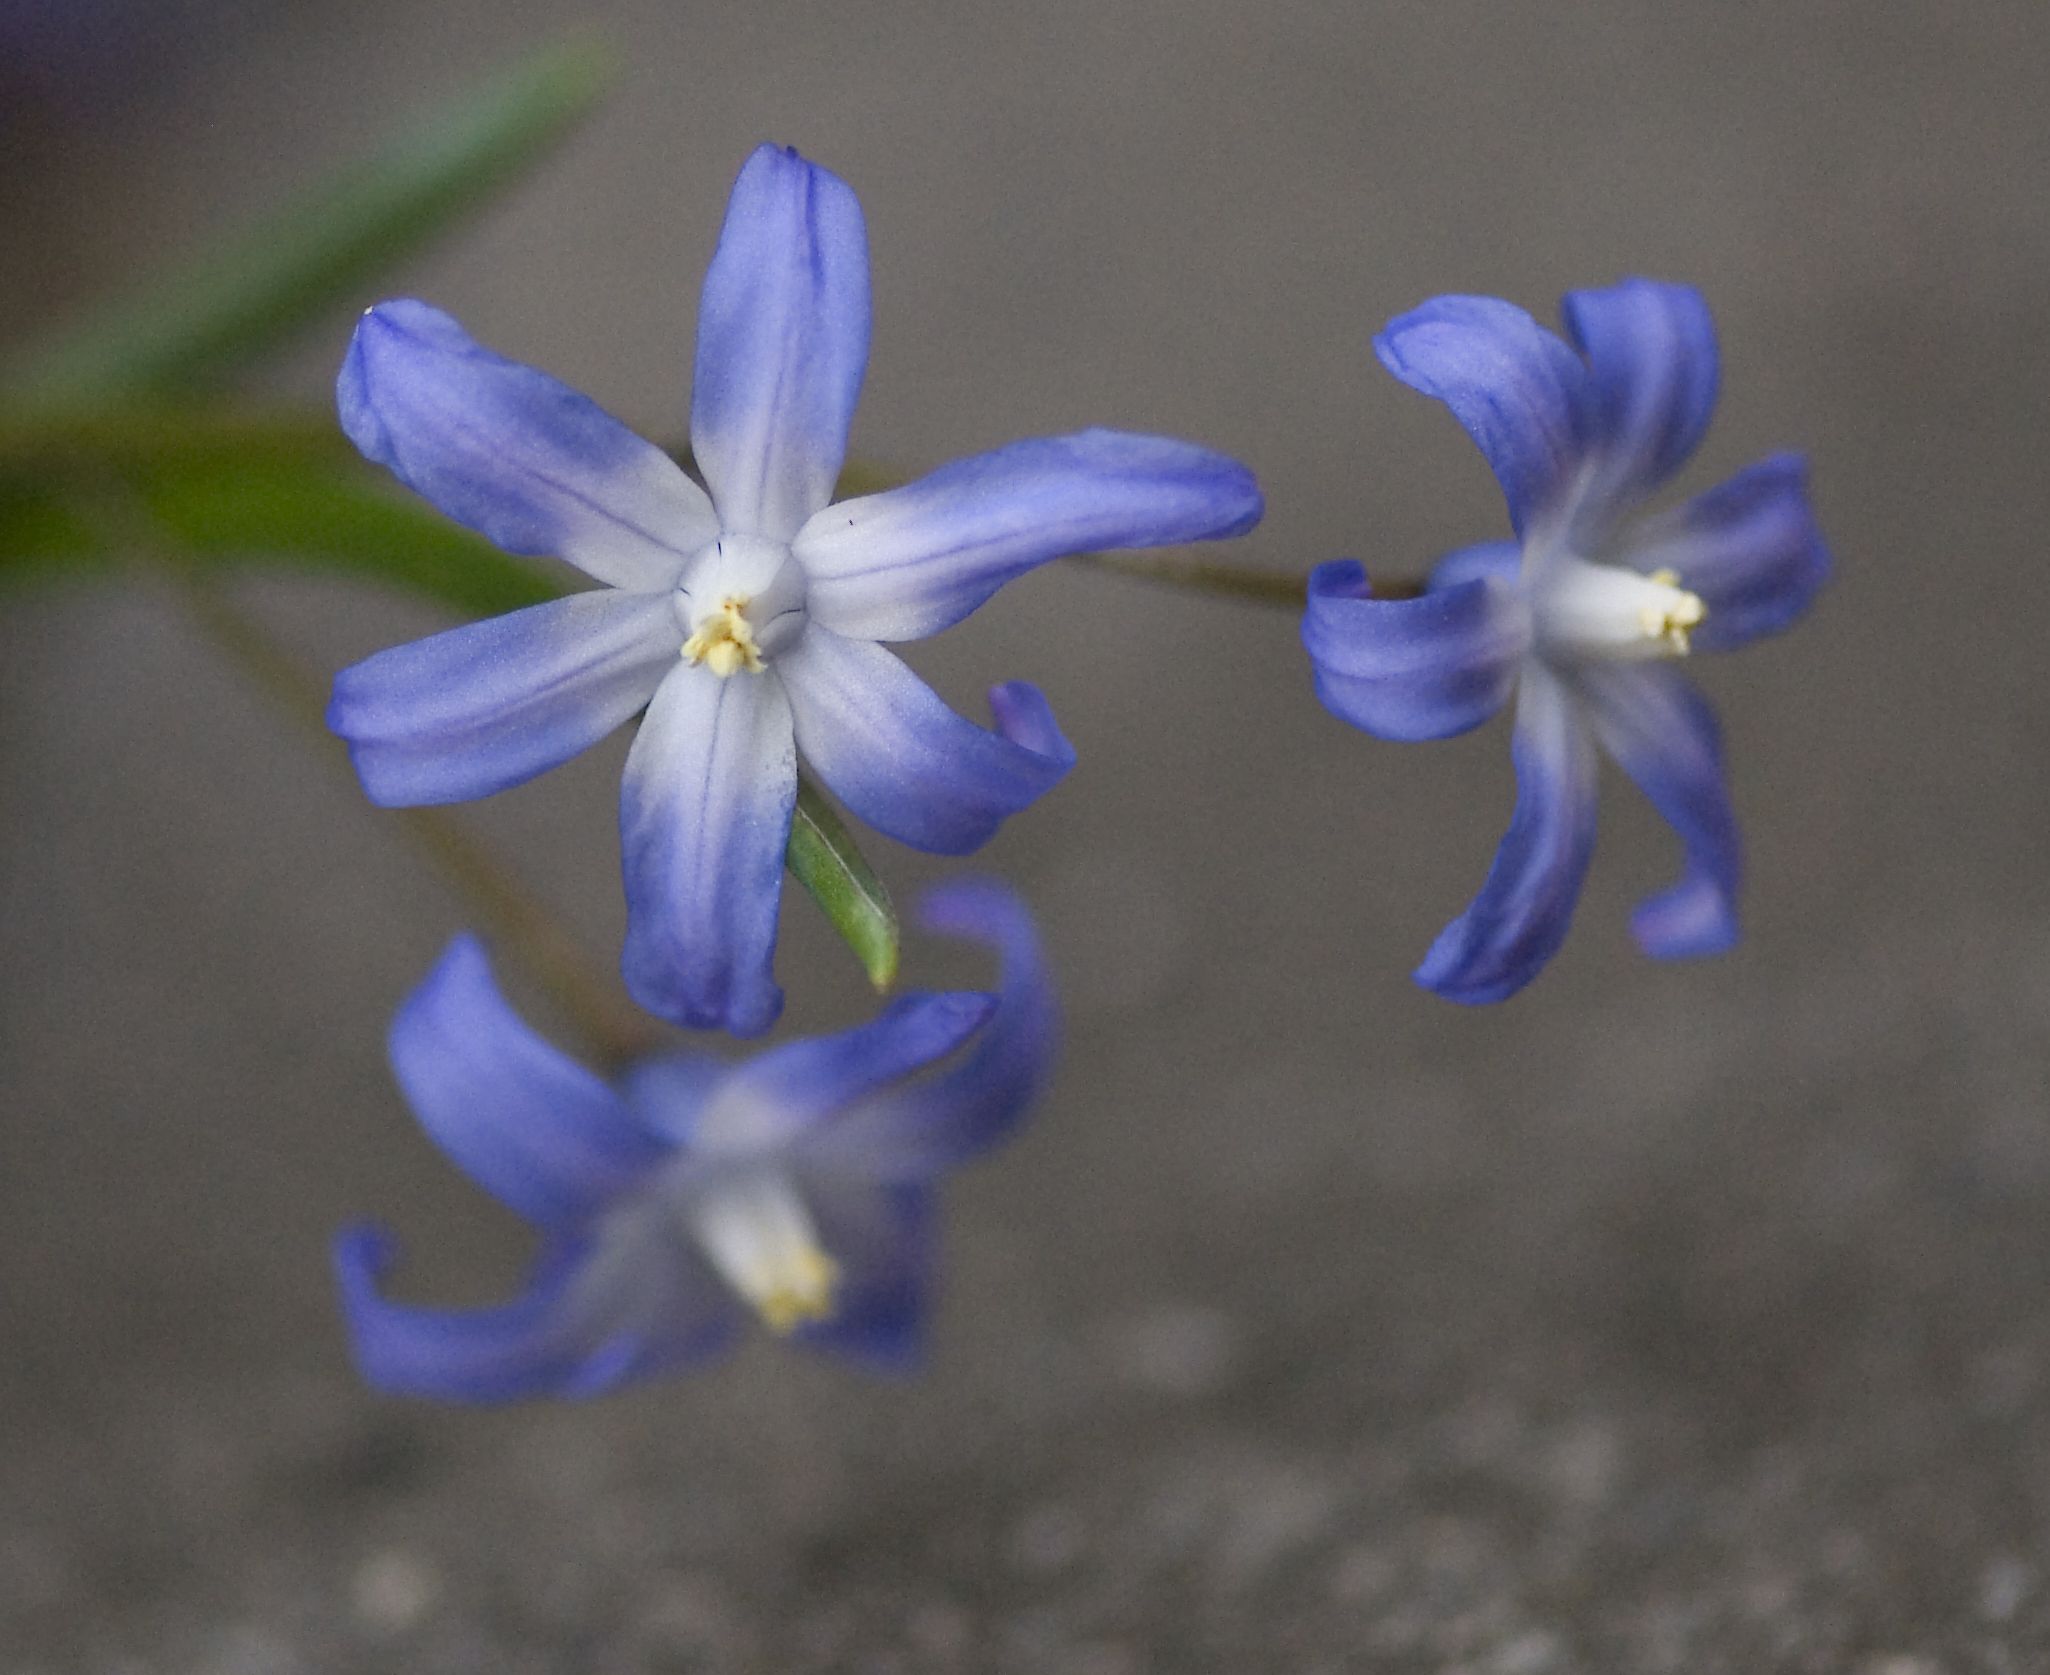 a few small blue flowers that are on the pavement